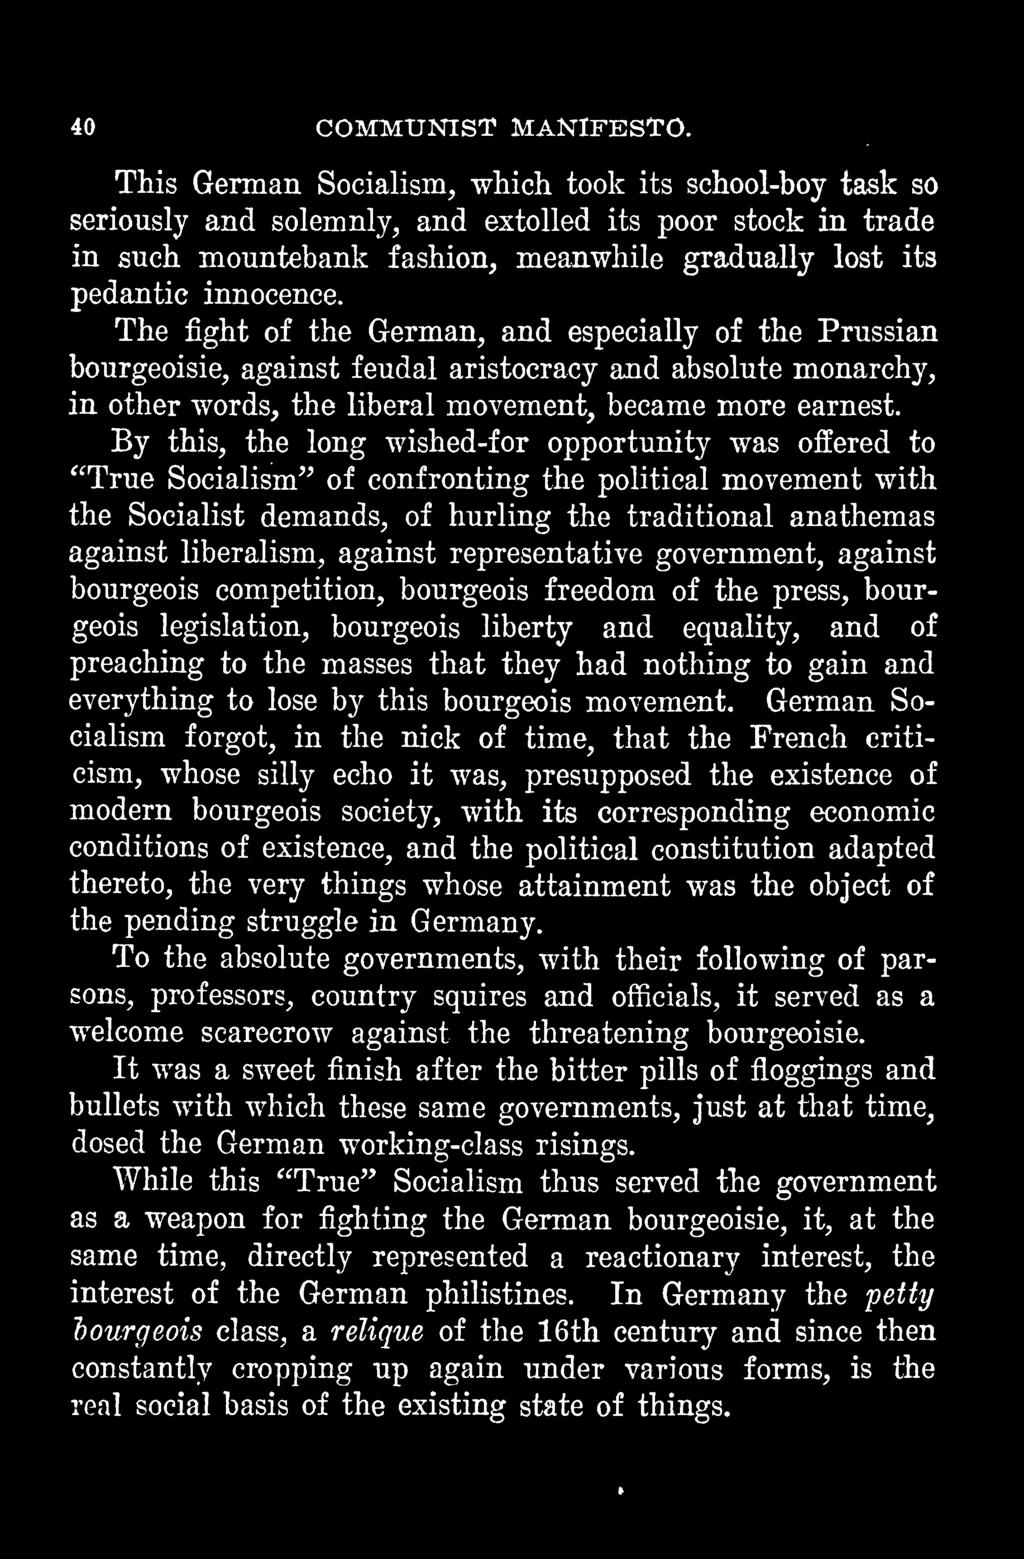 The fight of the German, and especially of the Prussian bourgeoisie, against feudal aristocracy and absolute monarchy, in other words, the liberal movement, became more earnest.